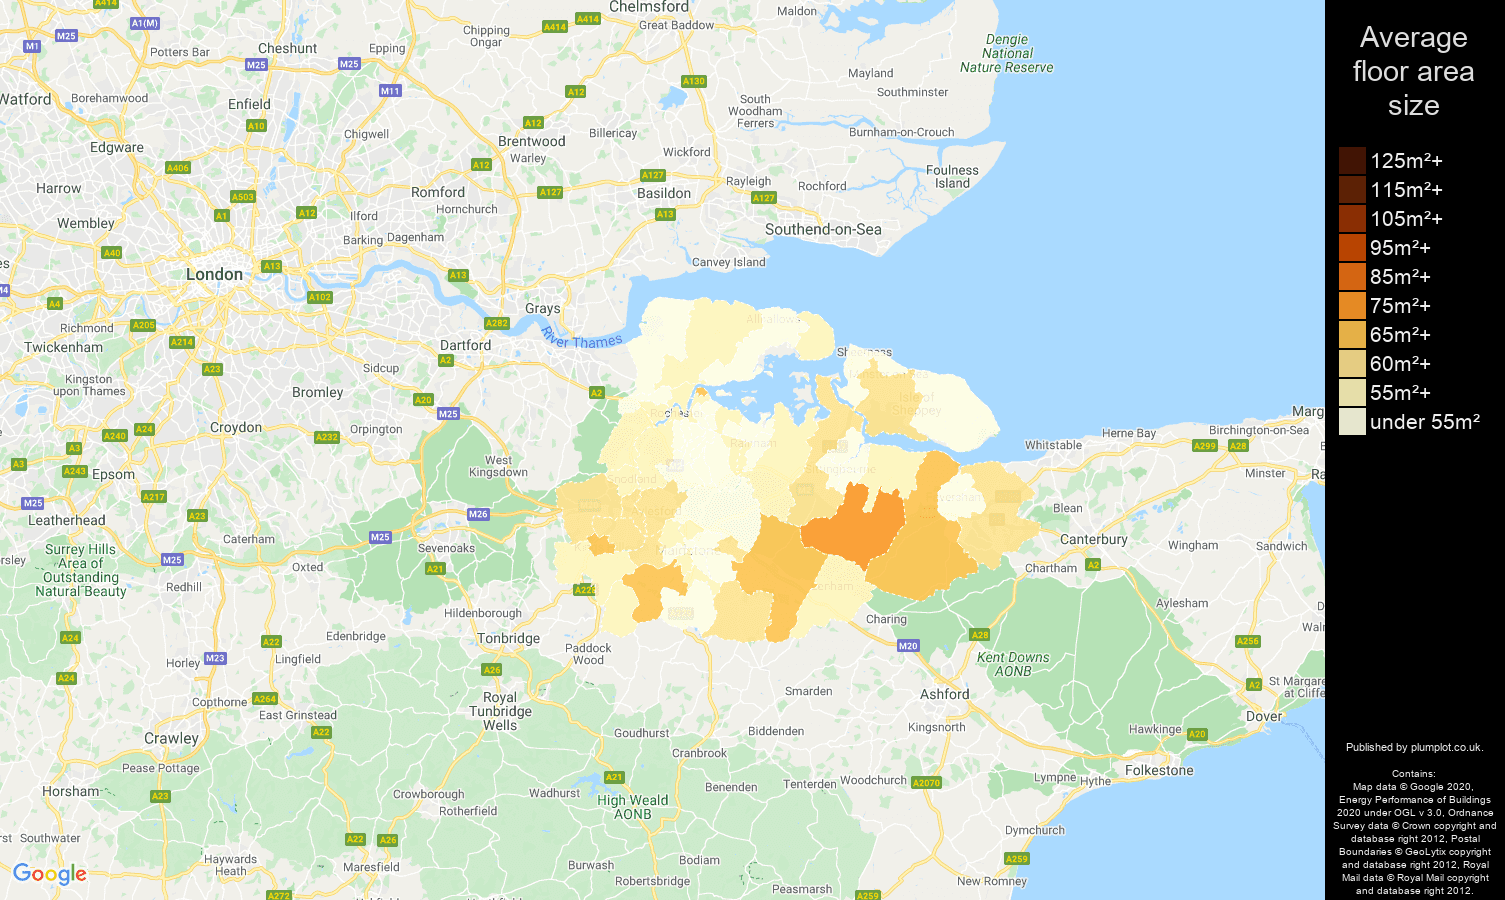 Rochester map of average floor area size of flats